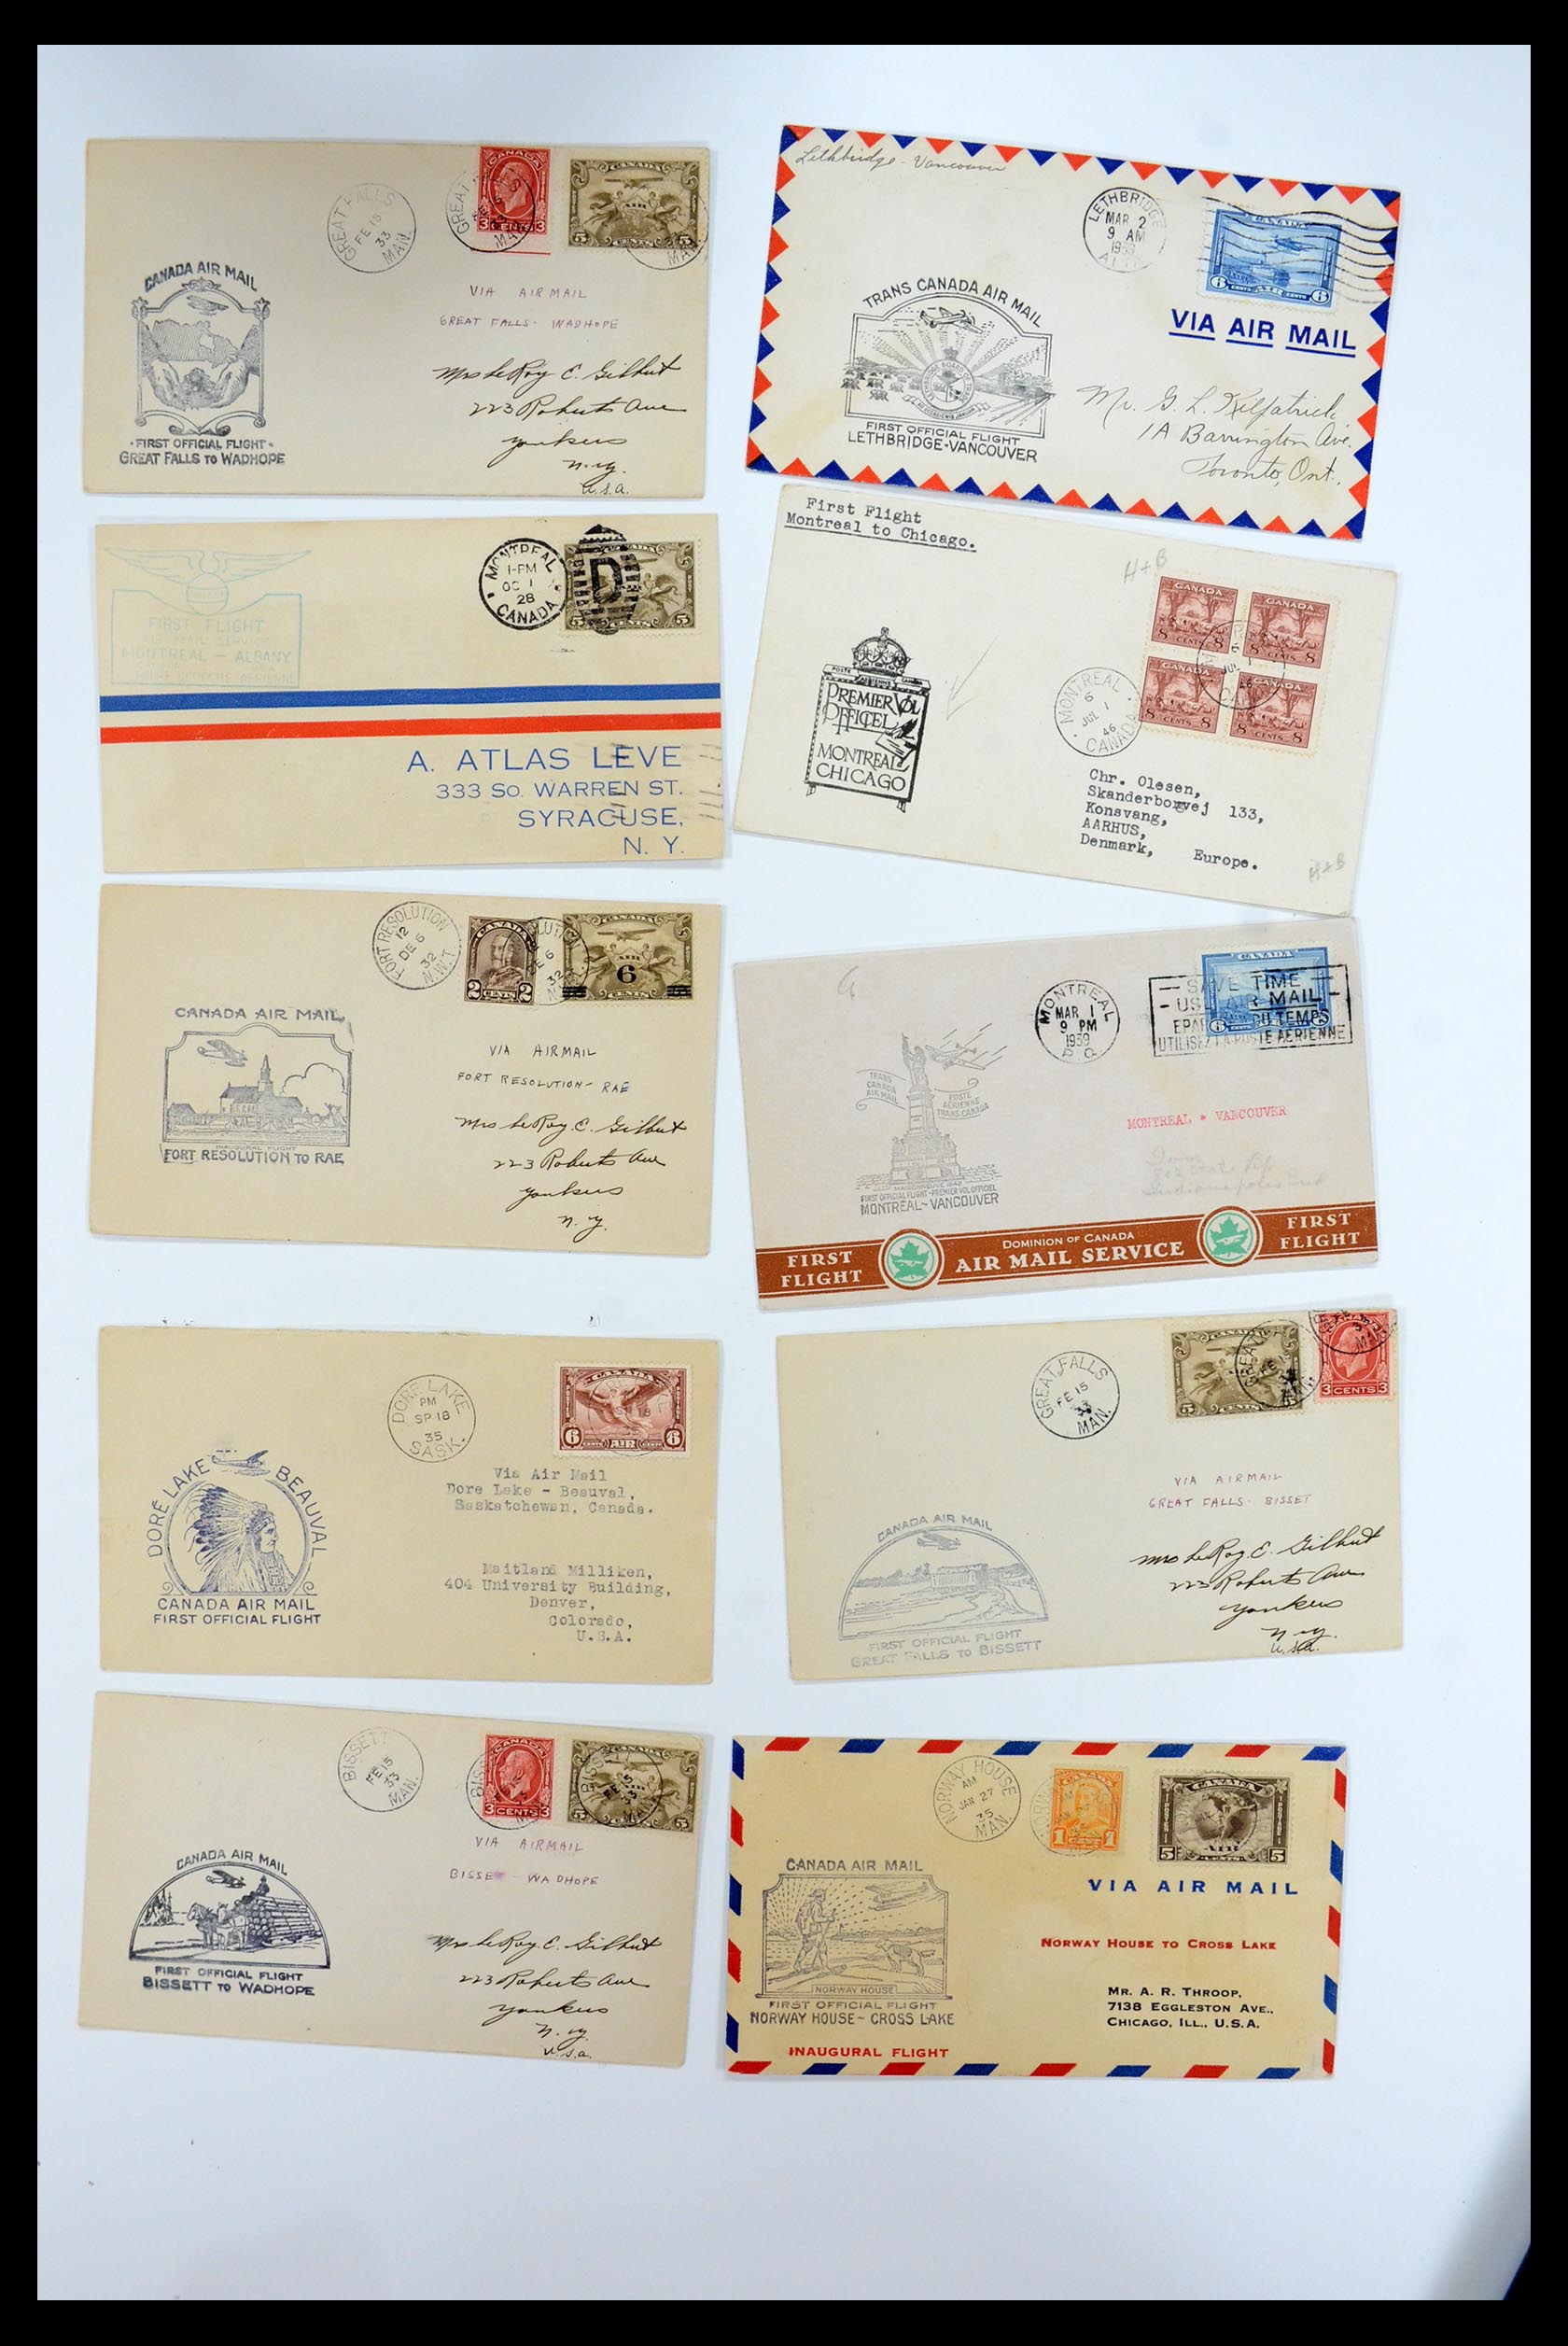 35338 359 - Stamp Collection 35338 Canada airmail covers 1927-1950.